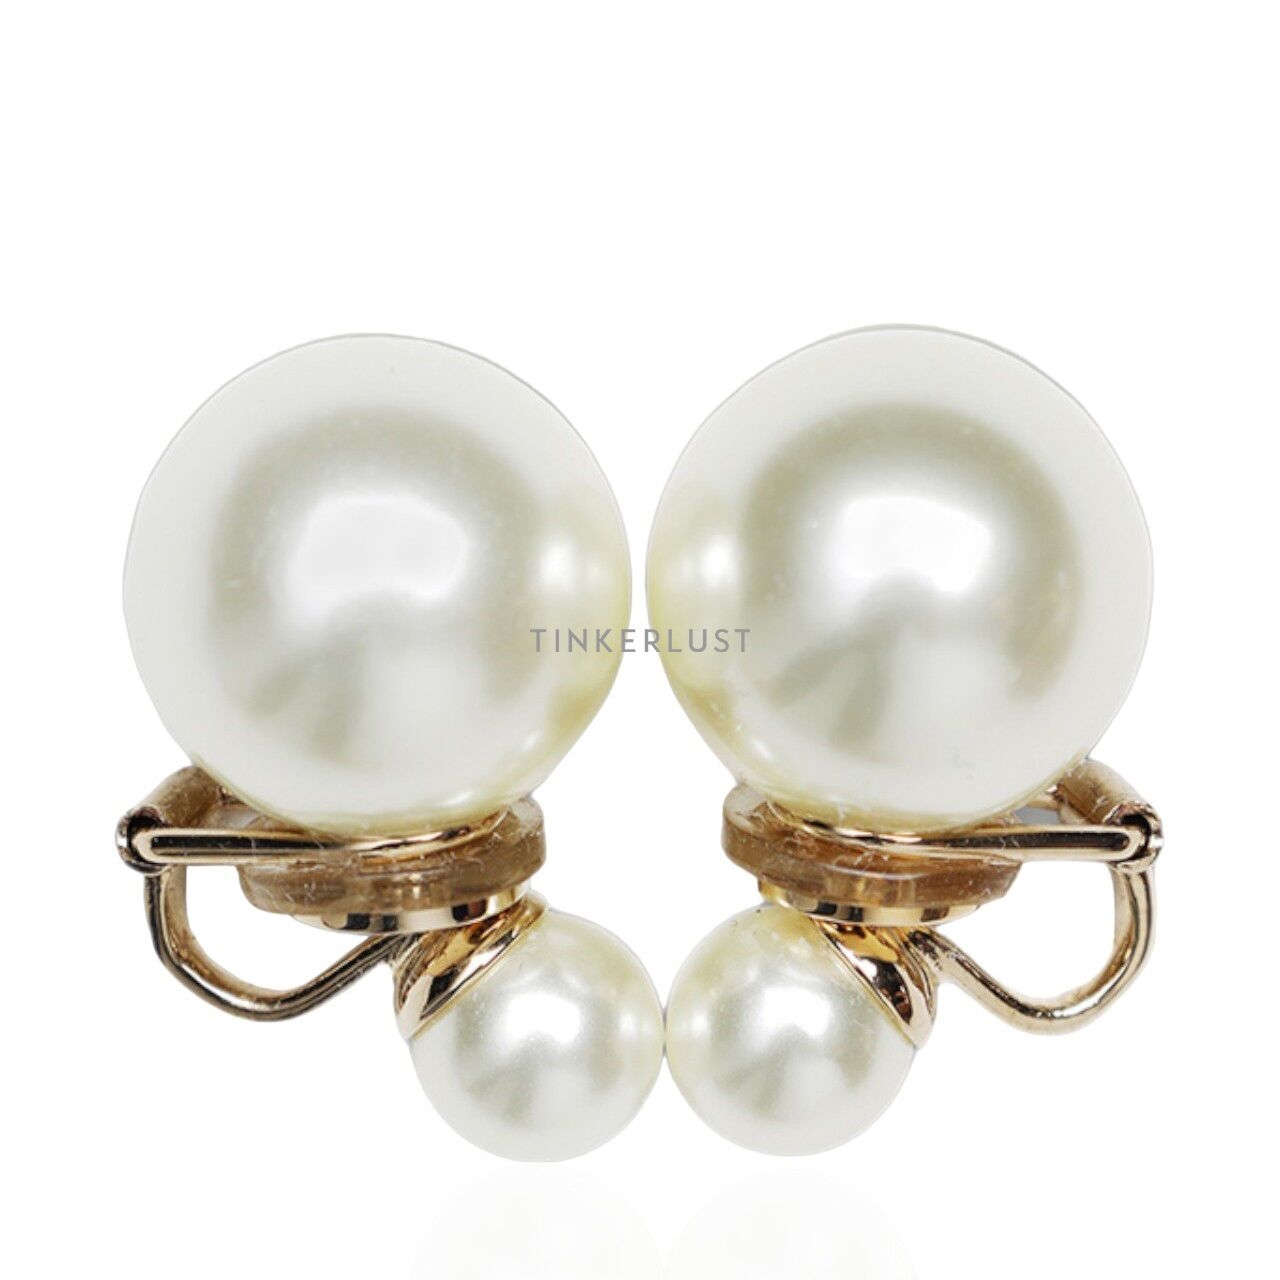 Christian Dior Dior Tribales Clip Earrings in Gold Metal with White Resin Pearls Jewellery